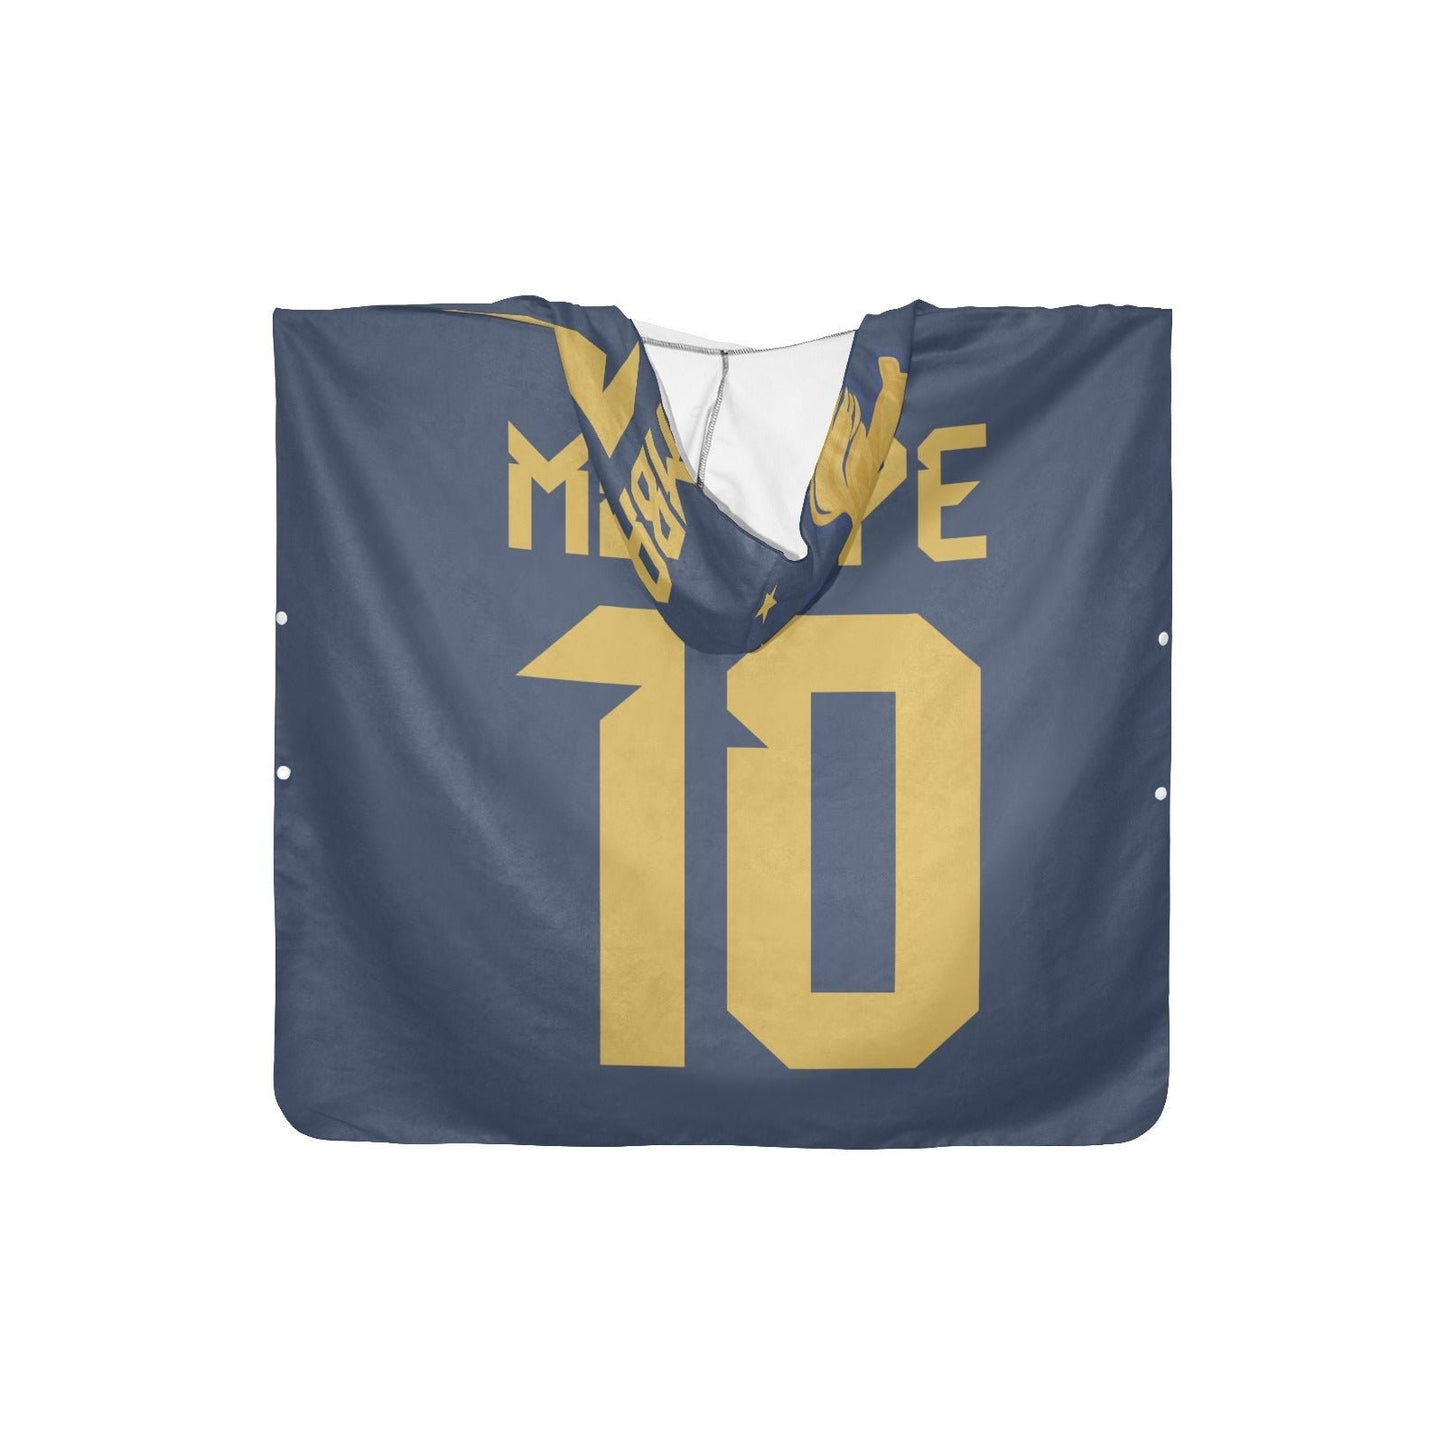 Kylian Mbappe 10 • Hooded Towel • FIFA World Cup • France World Cup 10 • Personalized FIFA